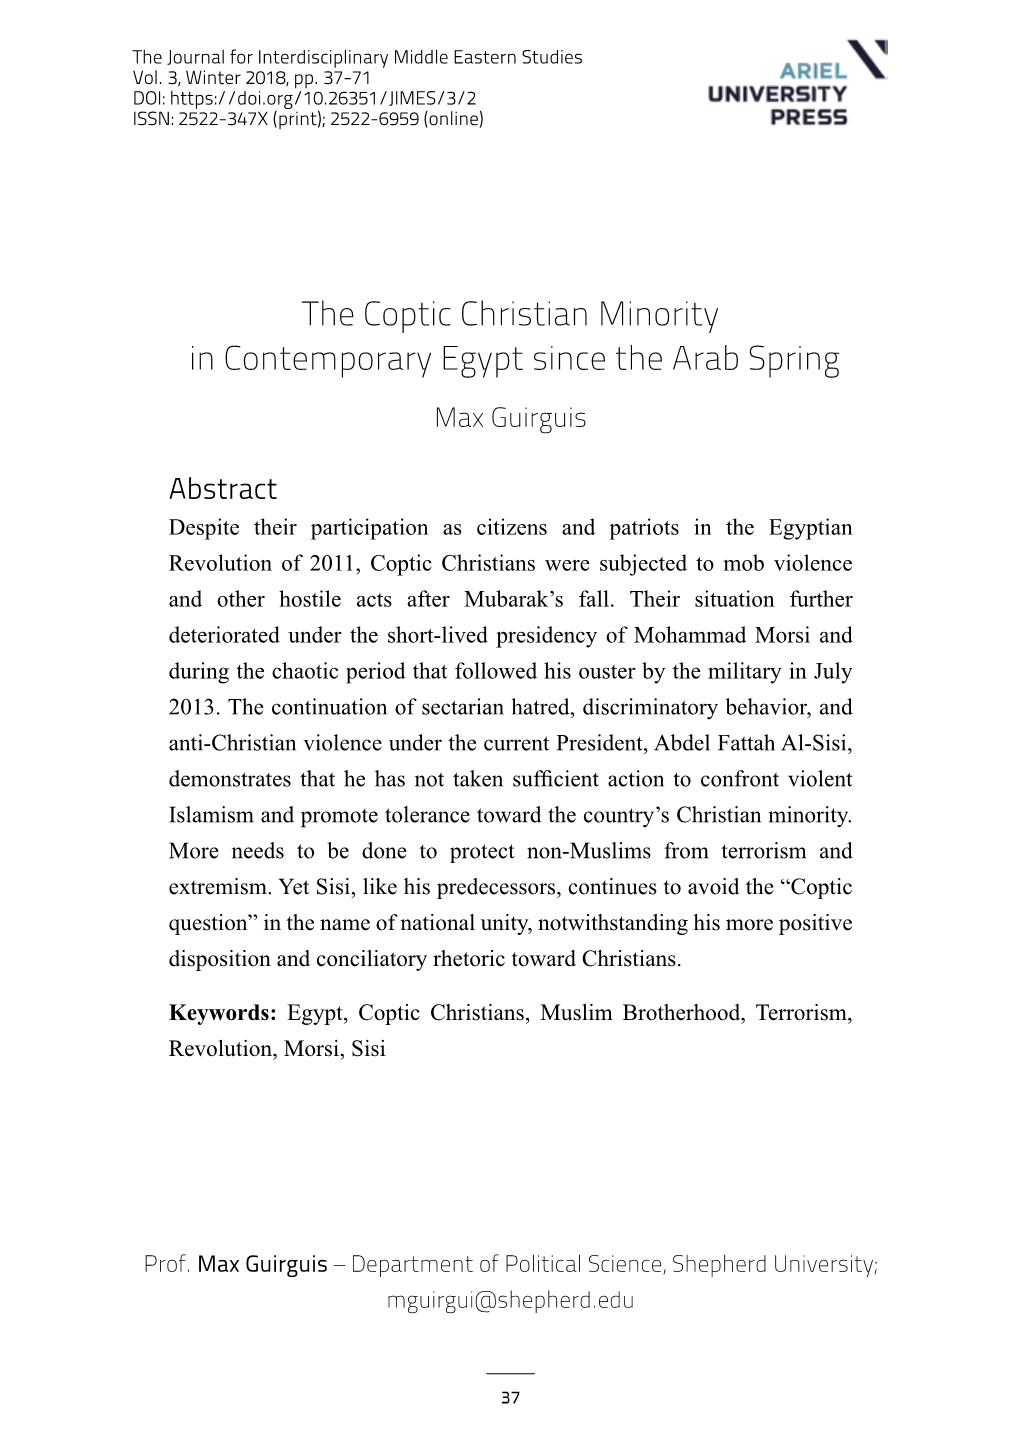 The Coptic Christian Minority in Contemporary Egypt Since the Arab Spring